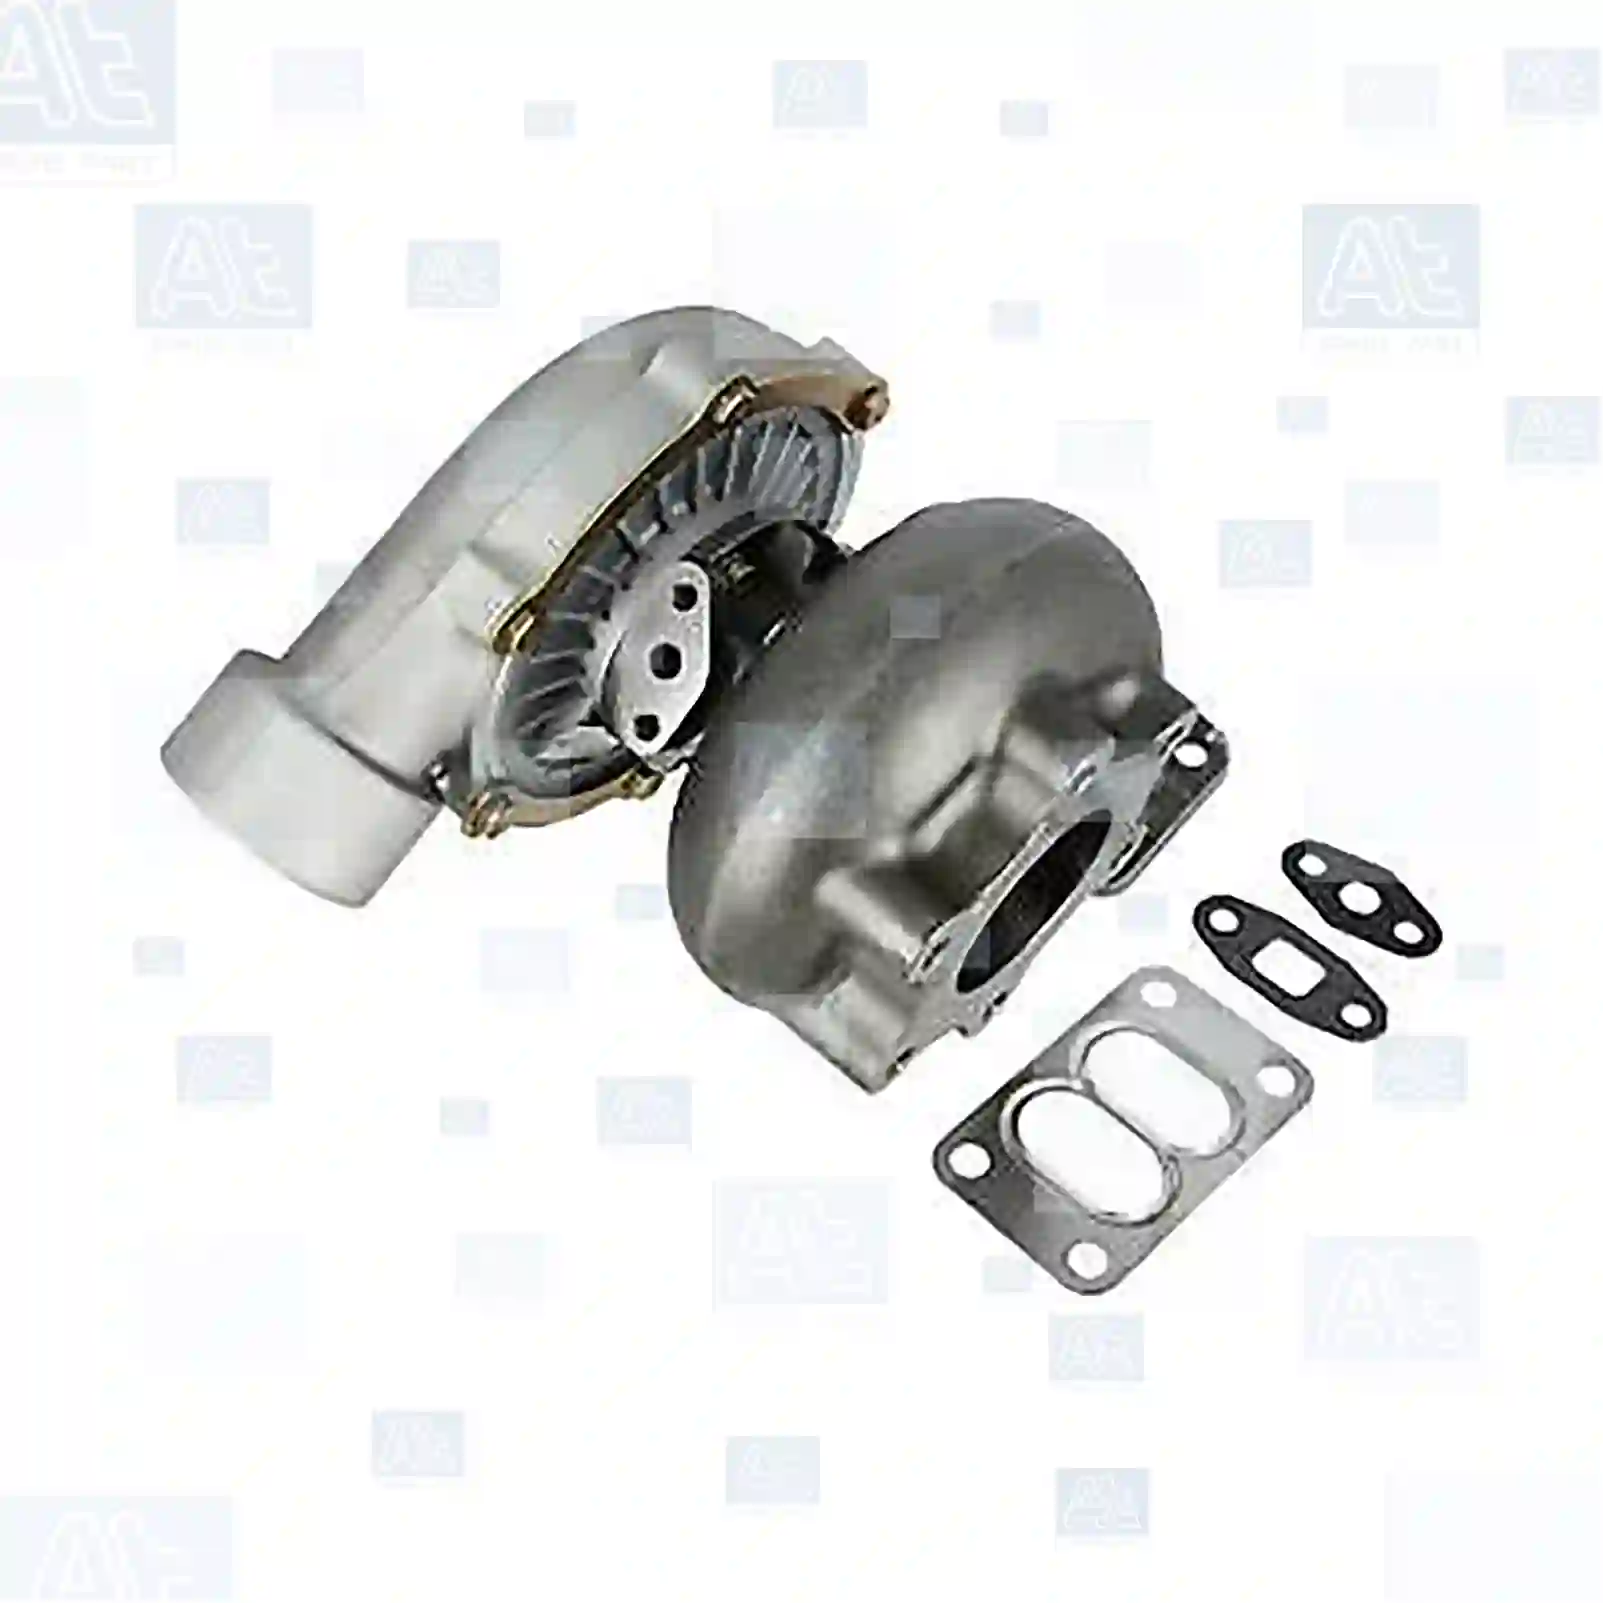 Turbocharger, with gasket kit, 77700356, N1011002912, N1011003536, 0030960099, 0030960199, 0030960899, 0030960999, 0030962399, 0030962499, 0030966899, 0030966999, 0030967699, 0030967899, 0030967999, 0030968999, 0030969099, 0040960799, 0040960899, 0040960999, 004096099980, 0040961099, 0040961899, 0040961999, 0040962099, 0040962199, 0040962899, 0040962999, 0040964099, 0040964199, 0040964299, 0040964399, 0040965299, 0040965599, 0040965699, 0040965799, 0040966099, 004096609980, 0040966199, 0040966299, 0040966399, 0040967699, 0050962399, 0050962499, 0050962599, 005096259980, 0050962699, 0050969399, 005096939980, 0060963199, 0060963299, 0060963399, 0060963499, 4620960299, 4620960399, 5096939980 ||  77700356 At Spare Part | Engine, Accelerator Pedal, Camshaft, Connecting Rod, Crankcase, Crankshaft, Cylinder Head, Engine Suspension Mountings, Exhaust Manifold, Exhaust Gas Recirculation, Filter Kits, Flywheel Housing, General Overhaul Kits, Engine, Intake Manifold, Oil Cleaner, Oil Cooler, Oil Filter, Oil Pump, Oil Sump, Piston & Liner, Sensor & Switch, Timing Case, Turbocharger, Cooling System, Belt Tensioner, Coolant Filter, Coolant Pipe, Corrosion Prevention Agent, Drive, Expansion Tank, Fan, Intercooler, Monitors & Gauges, Radiator, Thermostat, V-Belt / Timing belt, Water Pump, Fuel System, Electronical Injector Unit, Feed Pump, Fuel Filter, cpl., Fuel Gauge Sender,  Fuel Line, Fuel Pump, Fuel Tank, Injection Line Kit, Injection Pump, Exhaust System, Clutch & Pedal, Gearbox, Propeller Shaft, Axles, Brake System, Hubs & Wheels, Suspension, Leaf Spring, Universal Parts / Accessories, Steering, Electrical System, Cabin Turbocharger, with gasket kit, 77700356, N1011002912, N1011003536, 0030960099, 0030960199, 0030960899, 0030960999, 0030962399, 0030962499, 0030966899, 0030966999, 0030967699, 0030967899, 0030967999, 0030968999, 0030969099, 0040960799, 0040960899, 0040960999, 004096099980, 0040961099, 0040961899, 0040961999, 0040962099, 0040962199, 0040962899, 0040962999, 0040964099, 0040964199, 0040964299, 0040964399, 0040965299, 0040965599, 0040965699, 0040965799, 0040966099, 004096609980, 0040966199, 0040966299, 0040966399, 0040967699, 0050962399, 0050962499, 0050962599, 005096259980, 0050962699, 0050969399, 005096939980, 0060963199, 0060963299, 0060963399, 0060963499, 4620960299, 4620960399, 5096939980 ||  77700356 At Spare Part | Engine, Accelerator Pedal, Camshaft, Connecting Rod, Crankcase, Crankshaft, Cylinder Head, Engine Suspension Mountings, Exhaust Manifold, Exhaust Gas Recirculation, Filter Kits, Flywheel Housing, General Overhaul Kits, Engine, Intake Manifold, Oil Cleaner, Oil Cooler, Oil Filter, Oil Pump, Oil Sump, Piston & Liner, Sensor & Switch, Timing Case, Turbocharger, Cooling System, Belt Tensioner, Coolant Filter, Coolant Pipe, Corrosion Prevention Agent, Drive, Expansion Tank, Fan, Intercooler, Monitors & Gauges, Radiator, Thermostat, V-Belt / Timing belt, Water Pump, Fuel System, Electronical Injector Unit, Feed Pump, Fuel Filter, cpl., Fuel Gauge Sender,  Fuel Line, Fuel Pump, Fuel Tank, Injection Line Kit, Injection Pump, Exhaust System, Clutch & Pedal, Gearbox, Propeller Shaft, Axles, Brake System, Hubs & Wheels, Suspension, Leaf Spring, Universal Parts / Accessories, Steering, Electrical System, Cabin